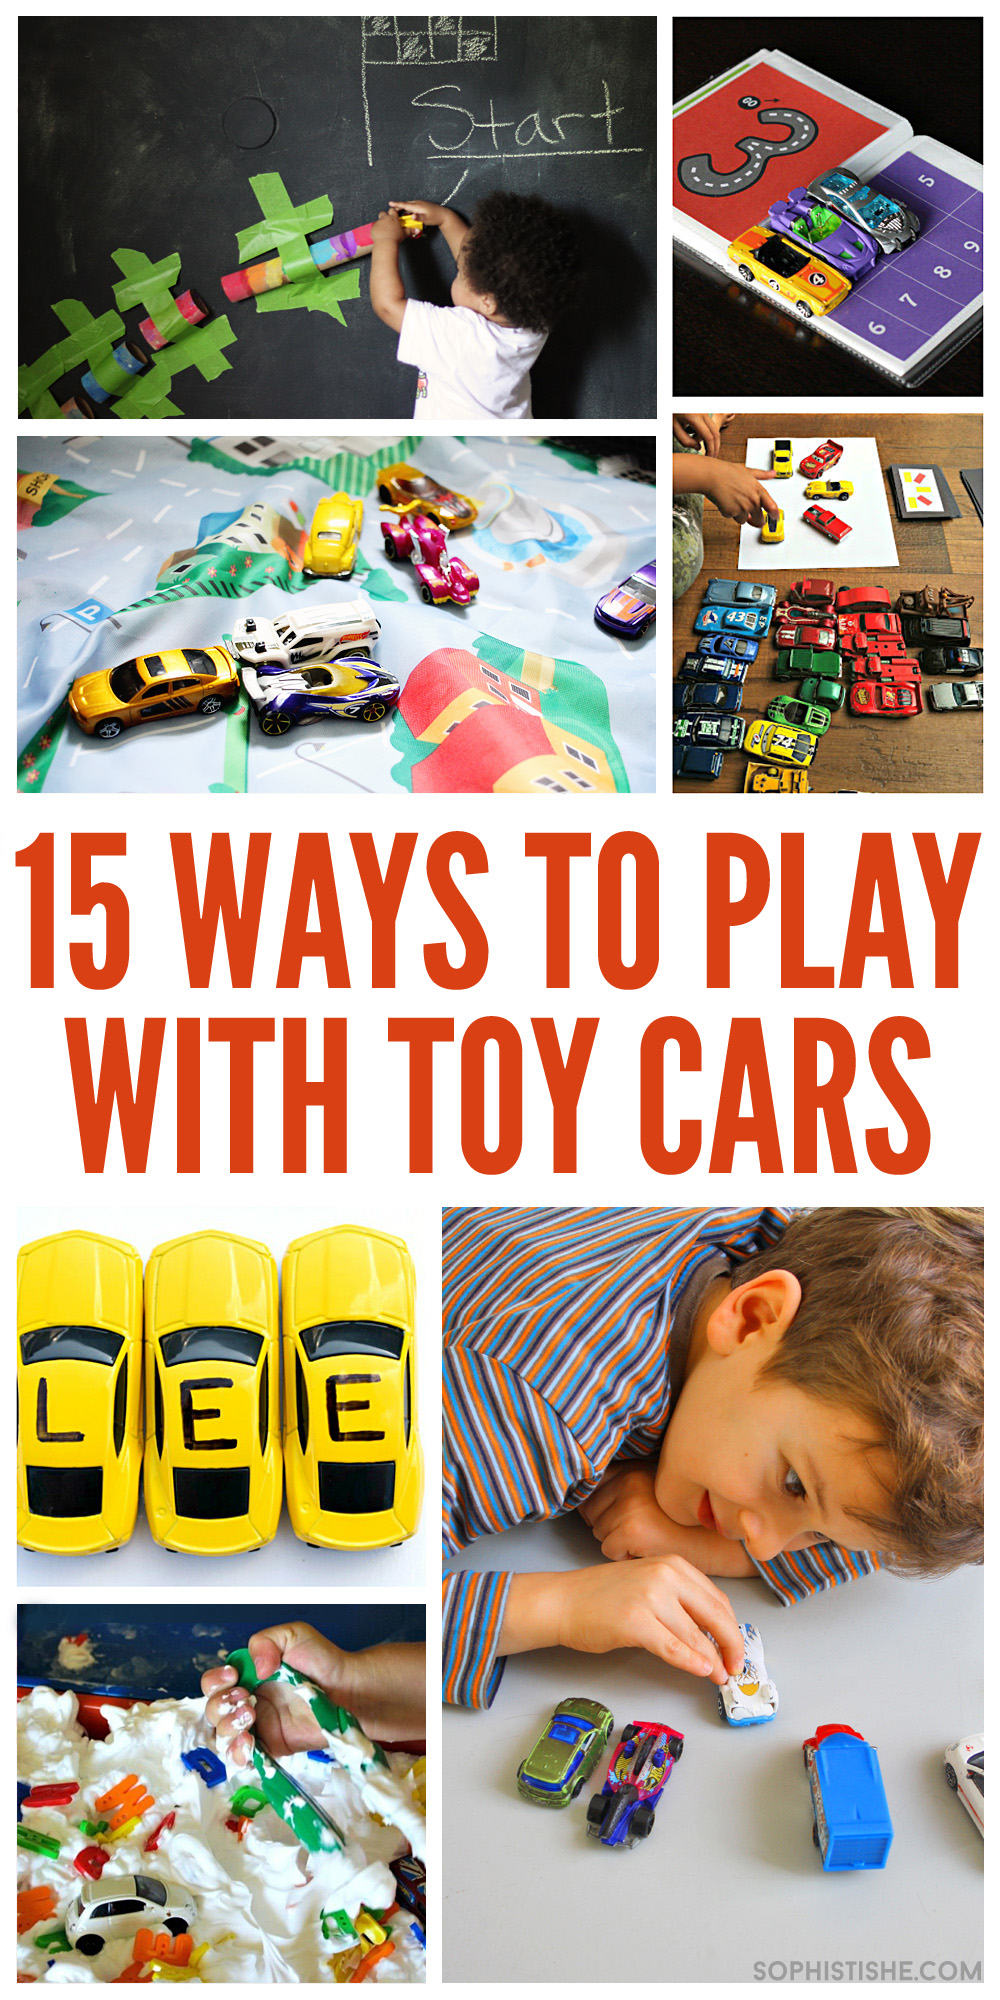 15 Ways To Play With Toy Cars